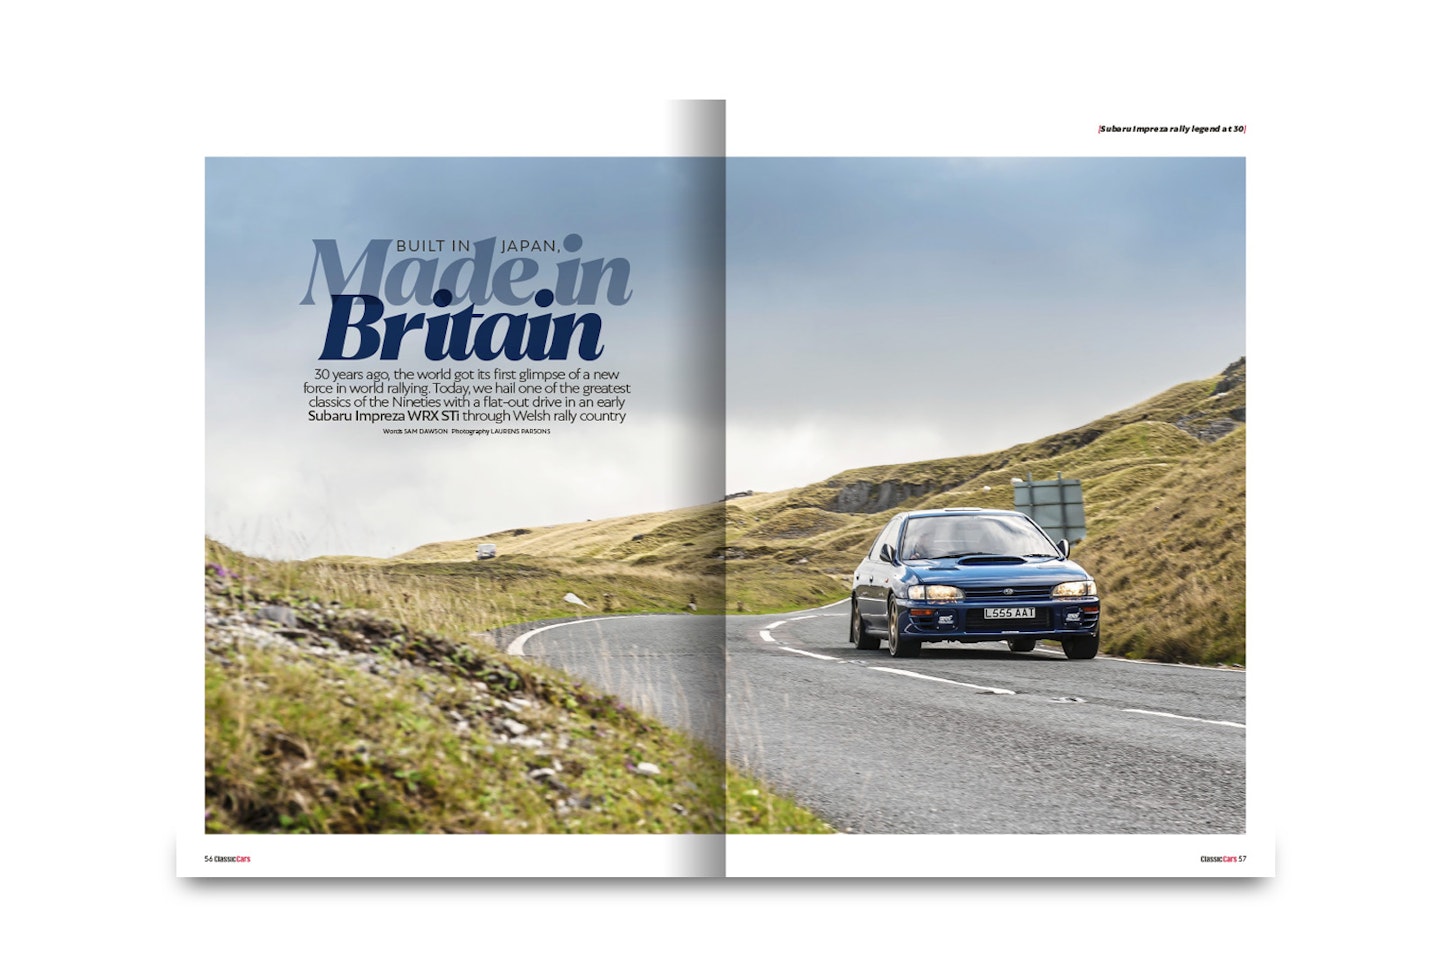 p56 Built in Japan, Made in Britain We take an exhilarating drive in Wales to mark 30 years of rallying Subaru Imprezas